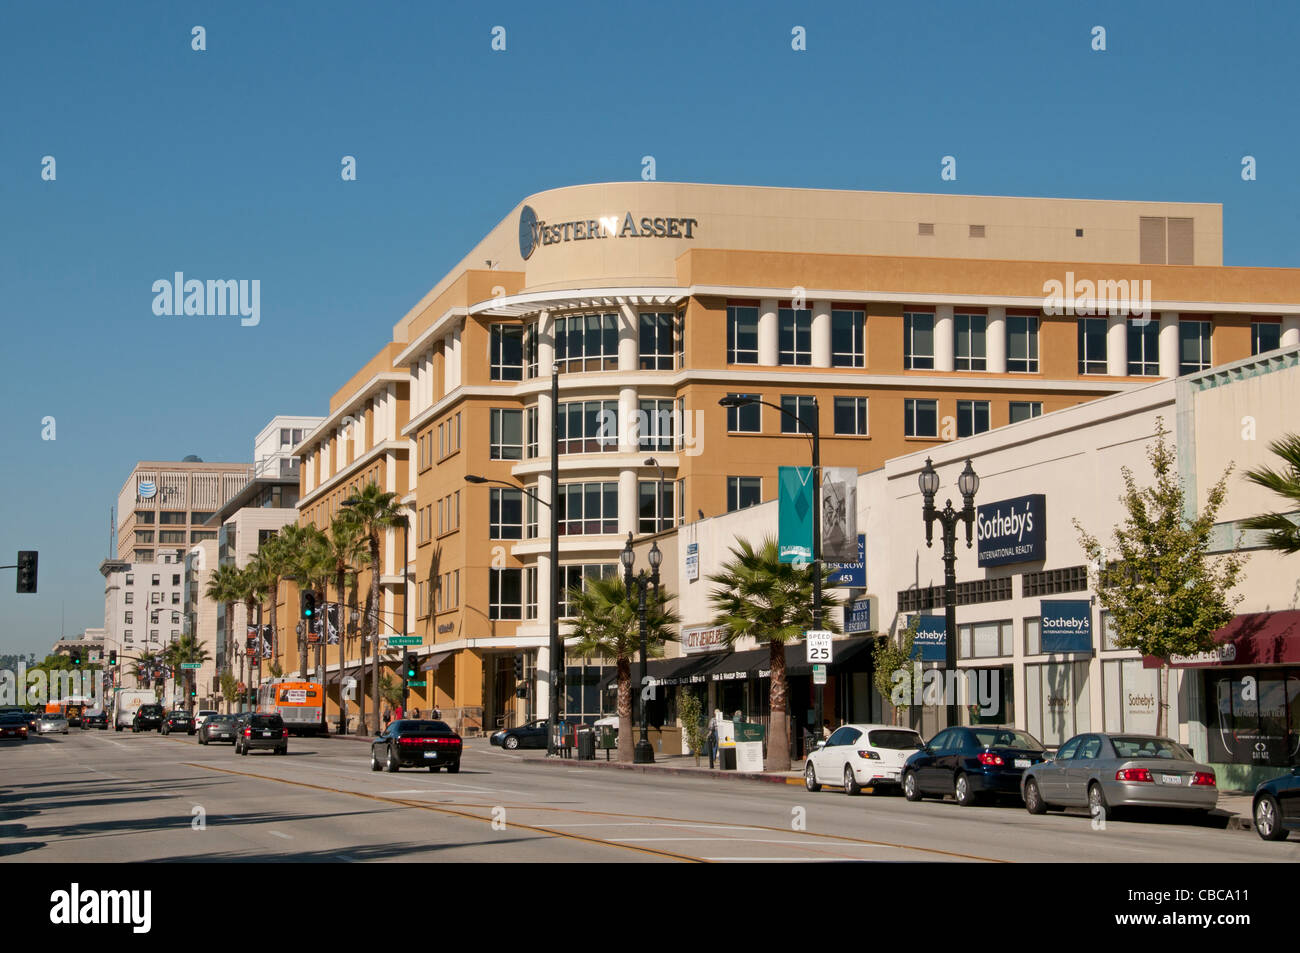 Western Asset Pasadena California United States Los Angeles Banque D'Images